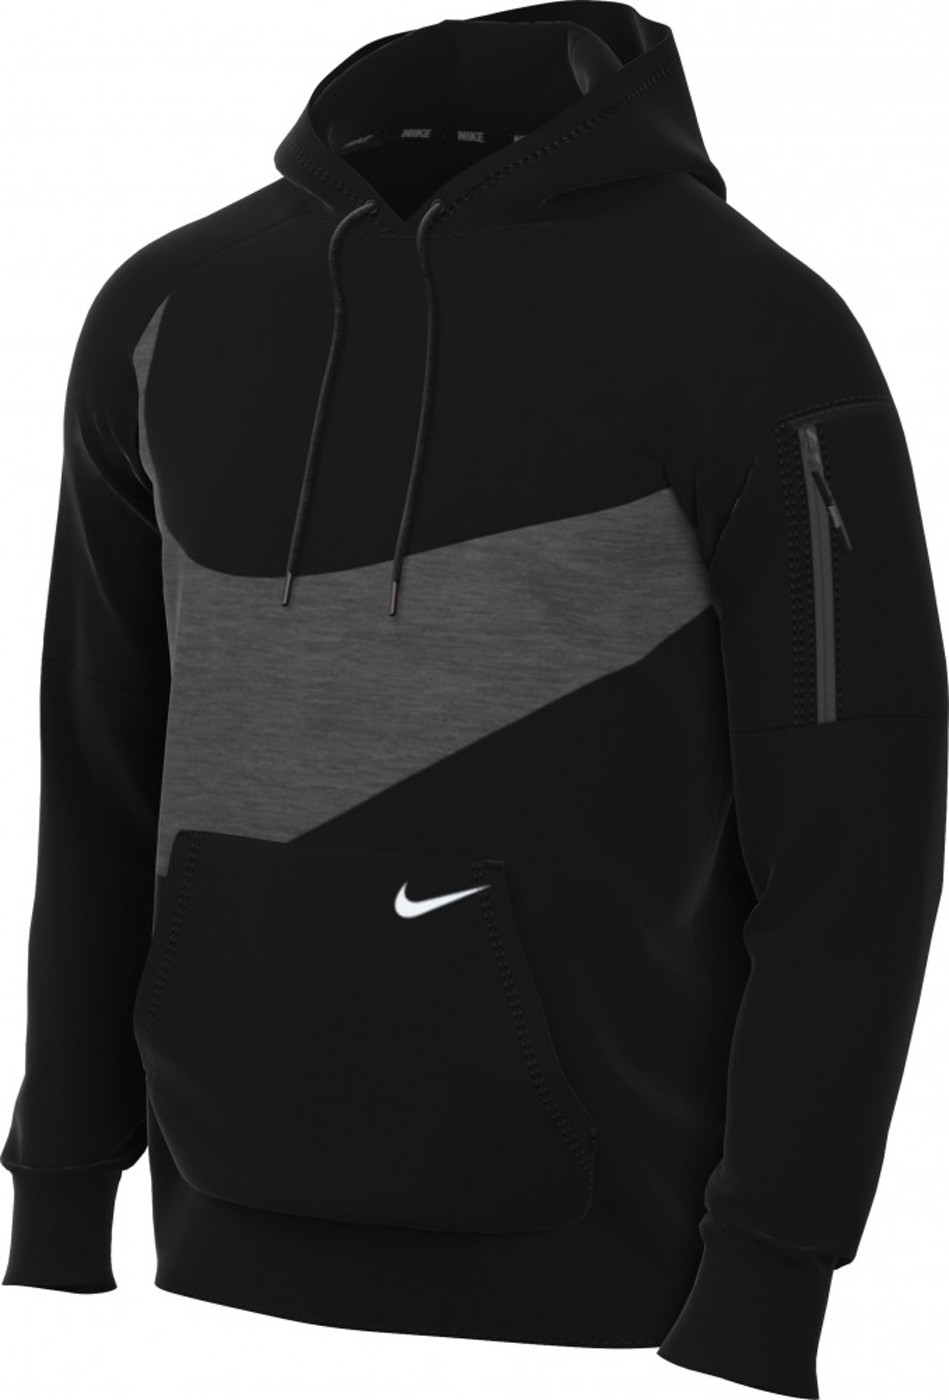 Nike Therma-FIT Pullover - Herren